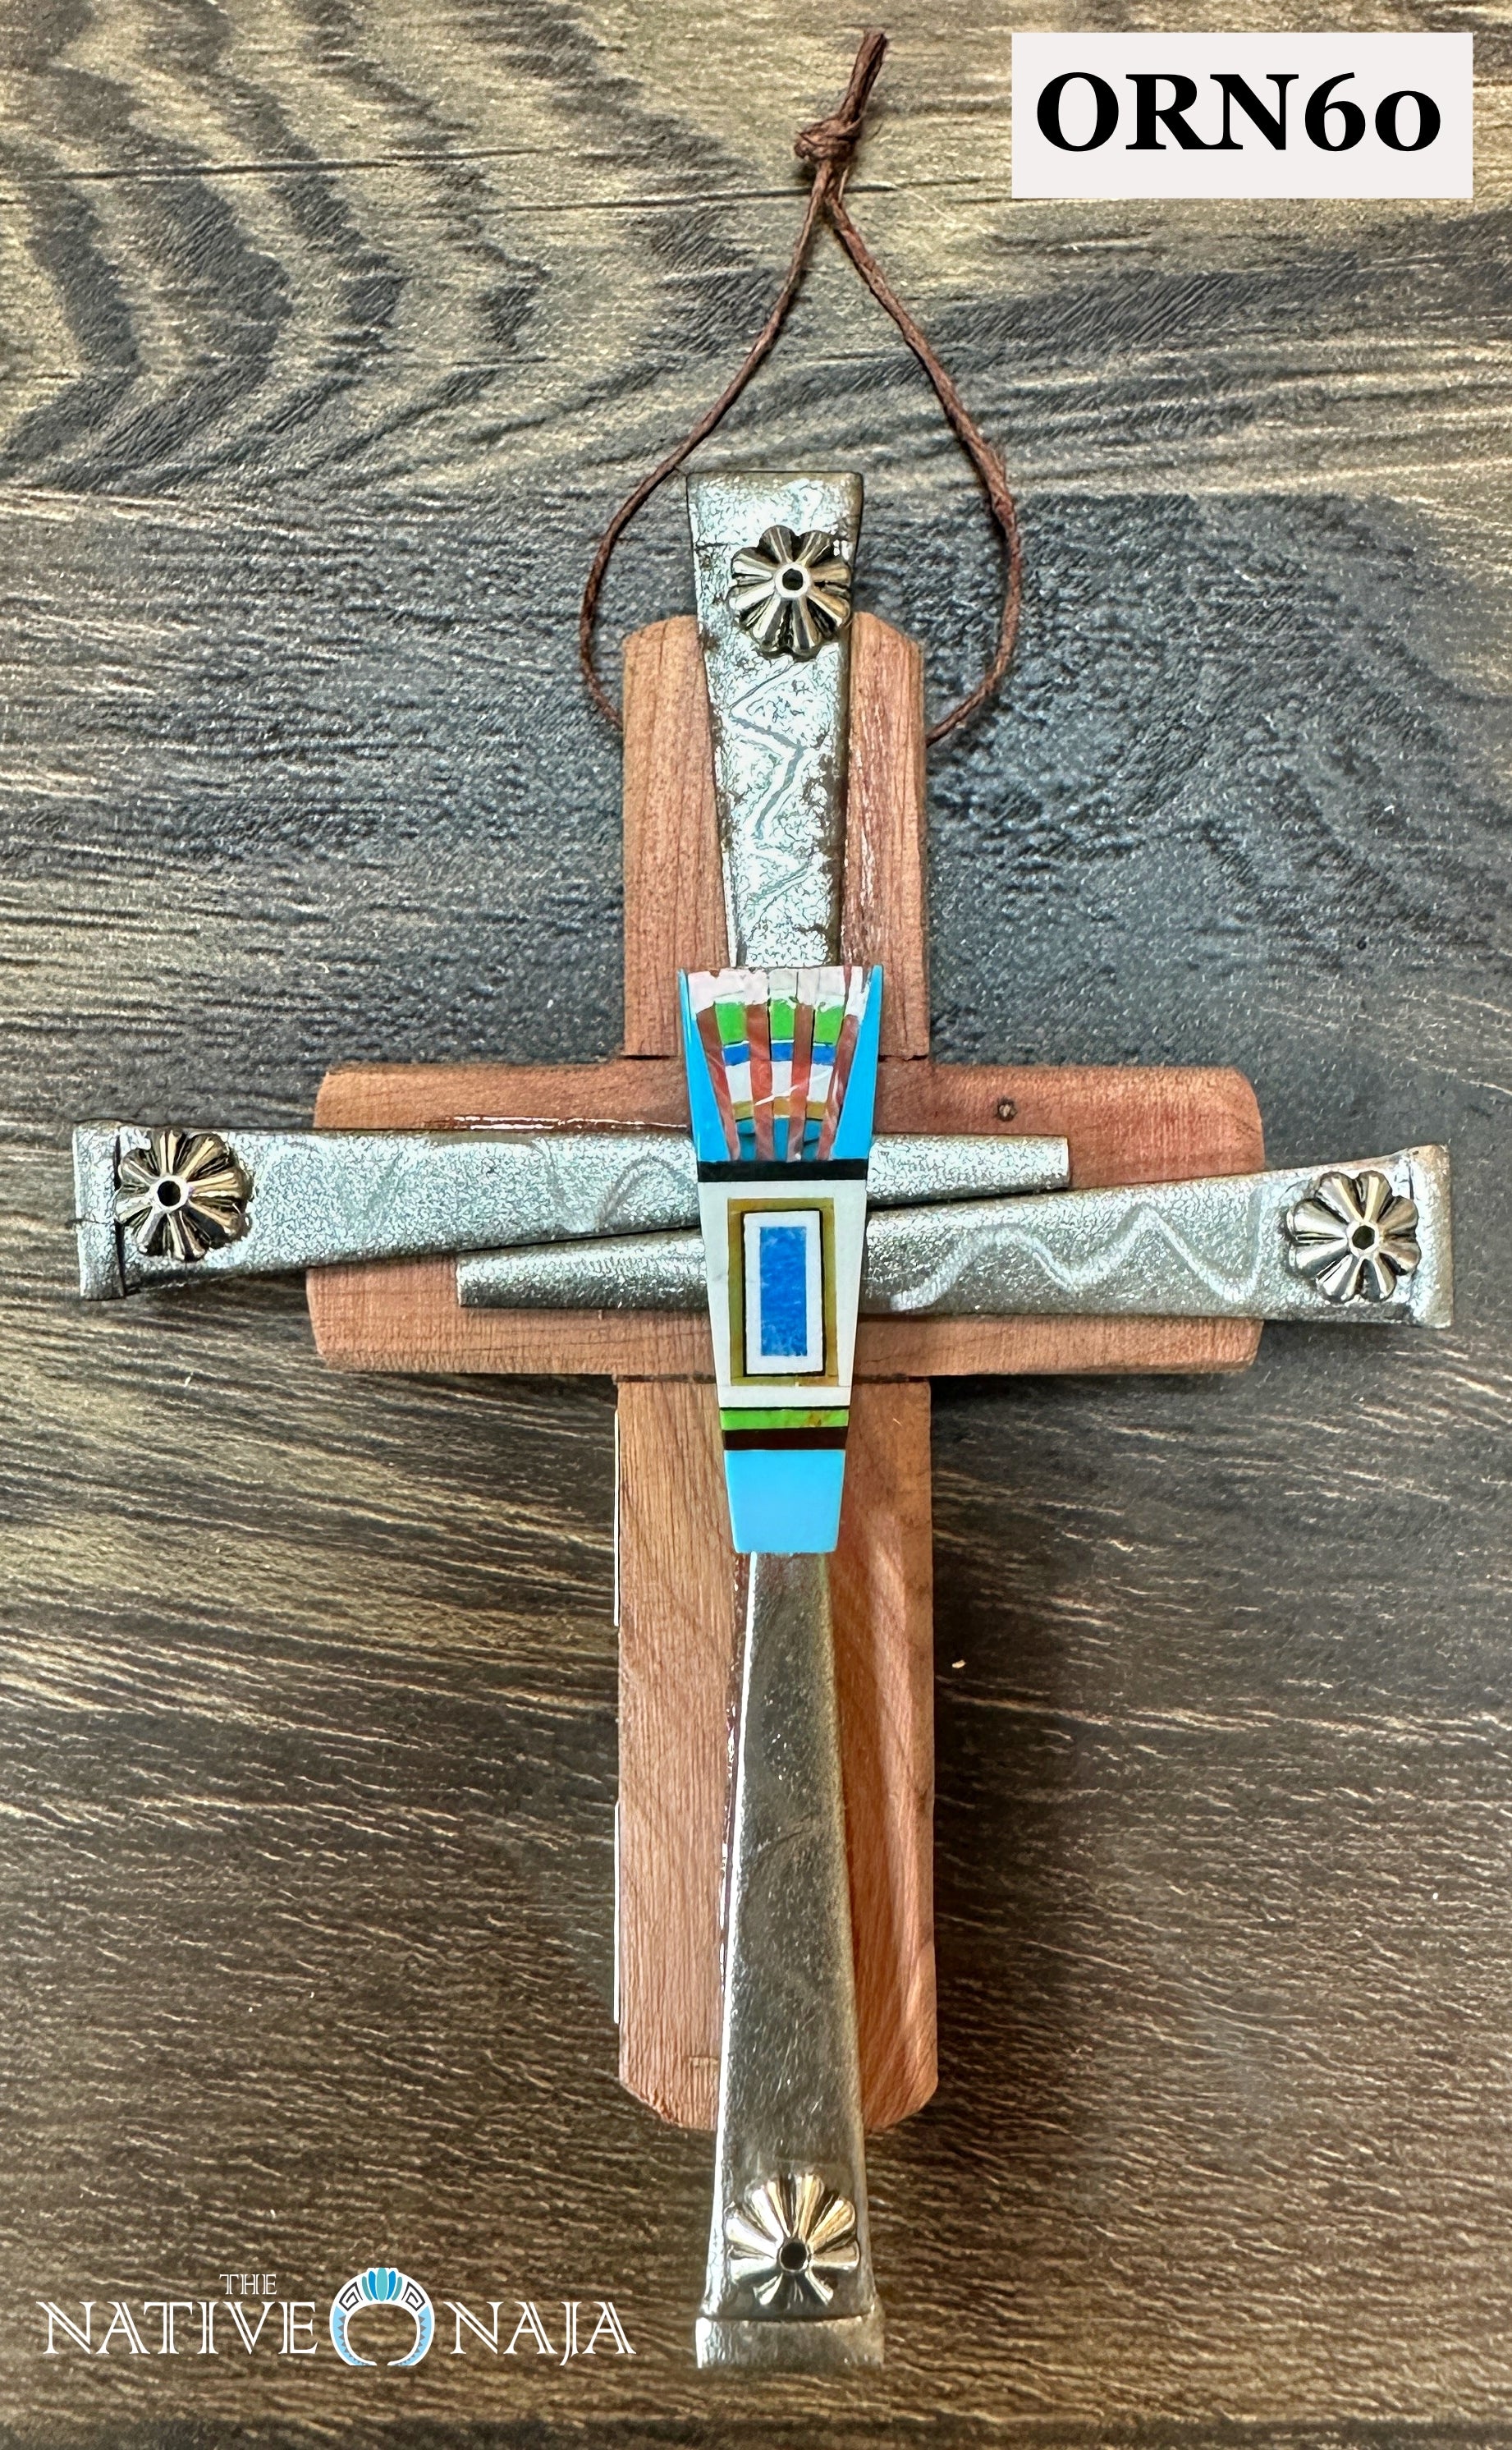 4"X5" Small Hanging Cross Ornament by NM Native American Artist Kenny Gallegos ORN60